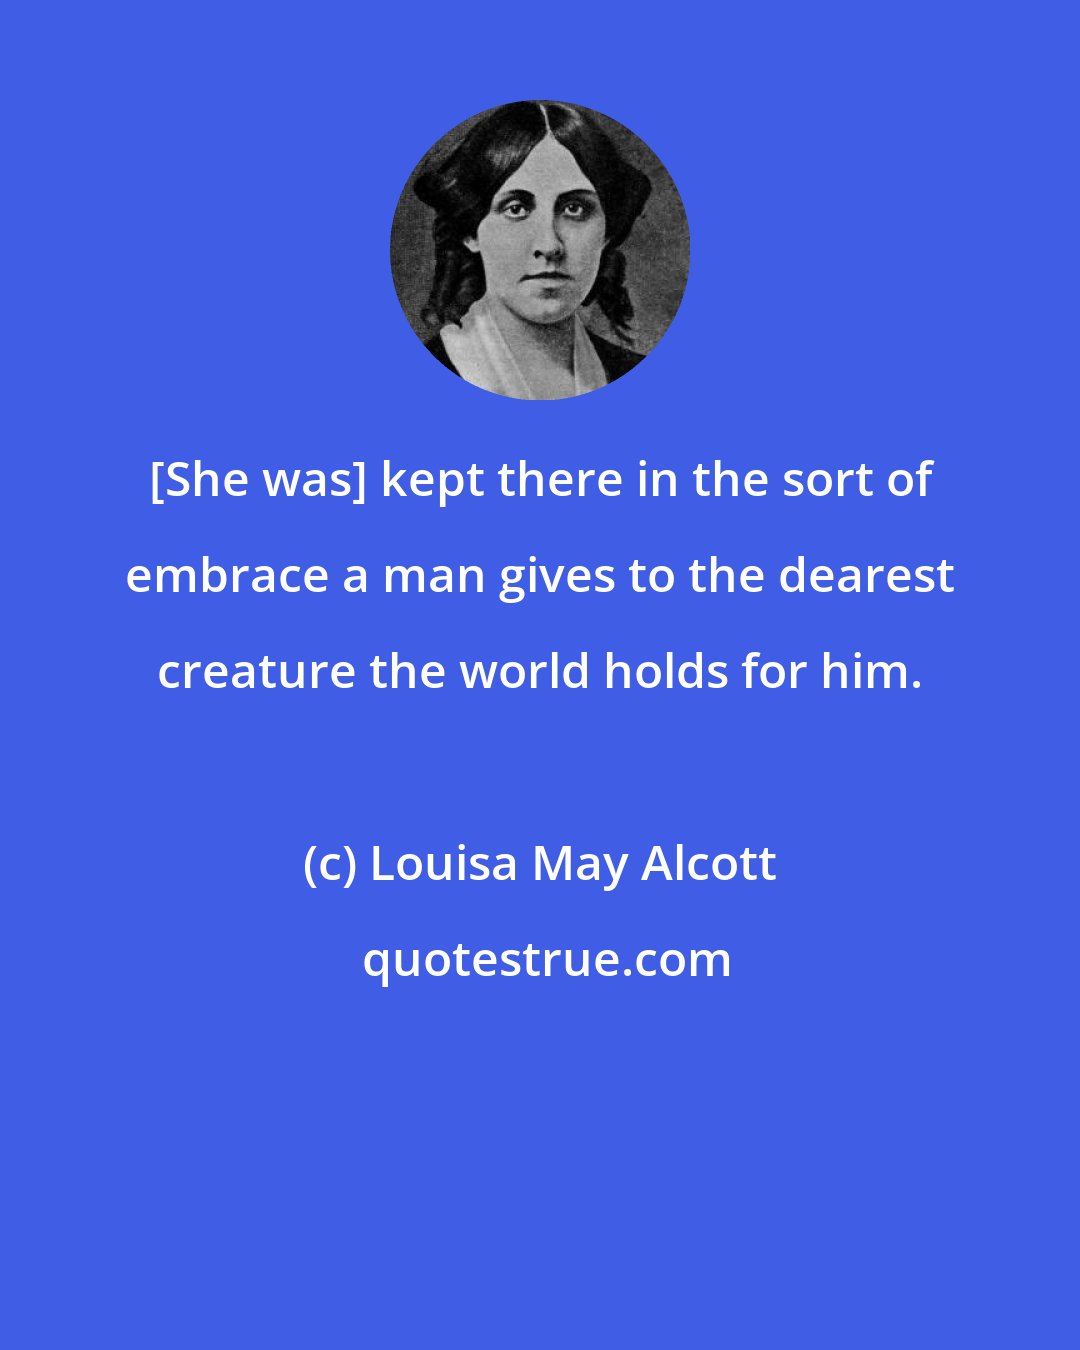 Louisa May Alcott: [She was] kept there in the sort of embrace a man gives to the dearest creature the world holds for him.